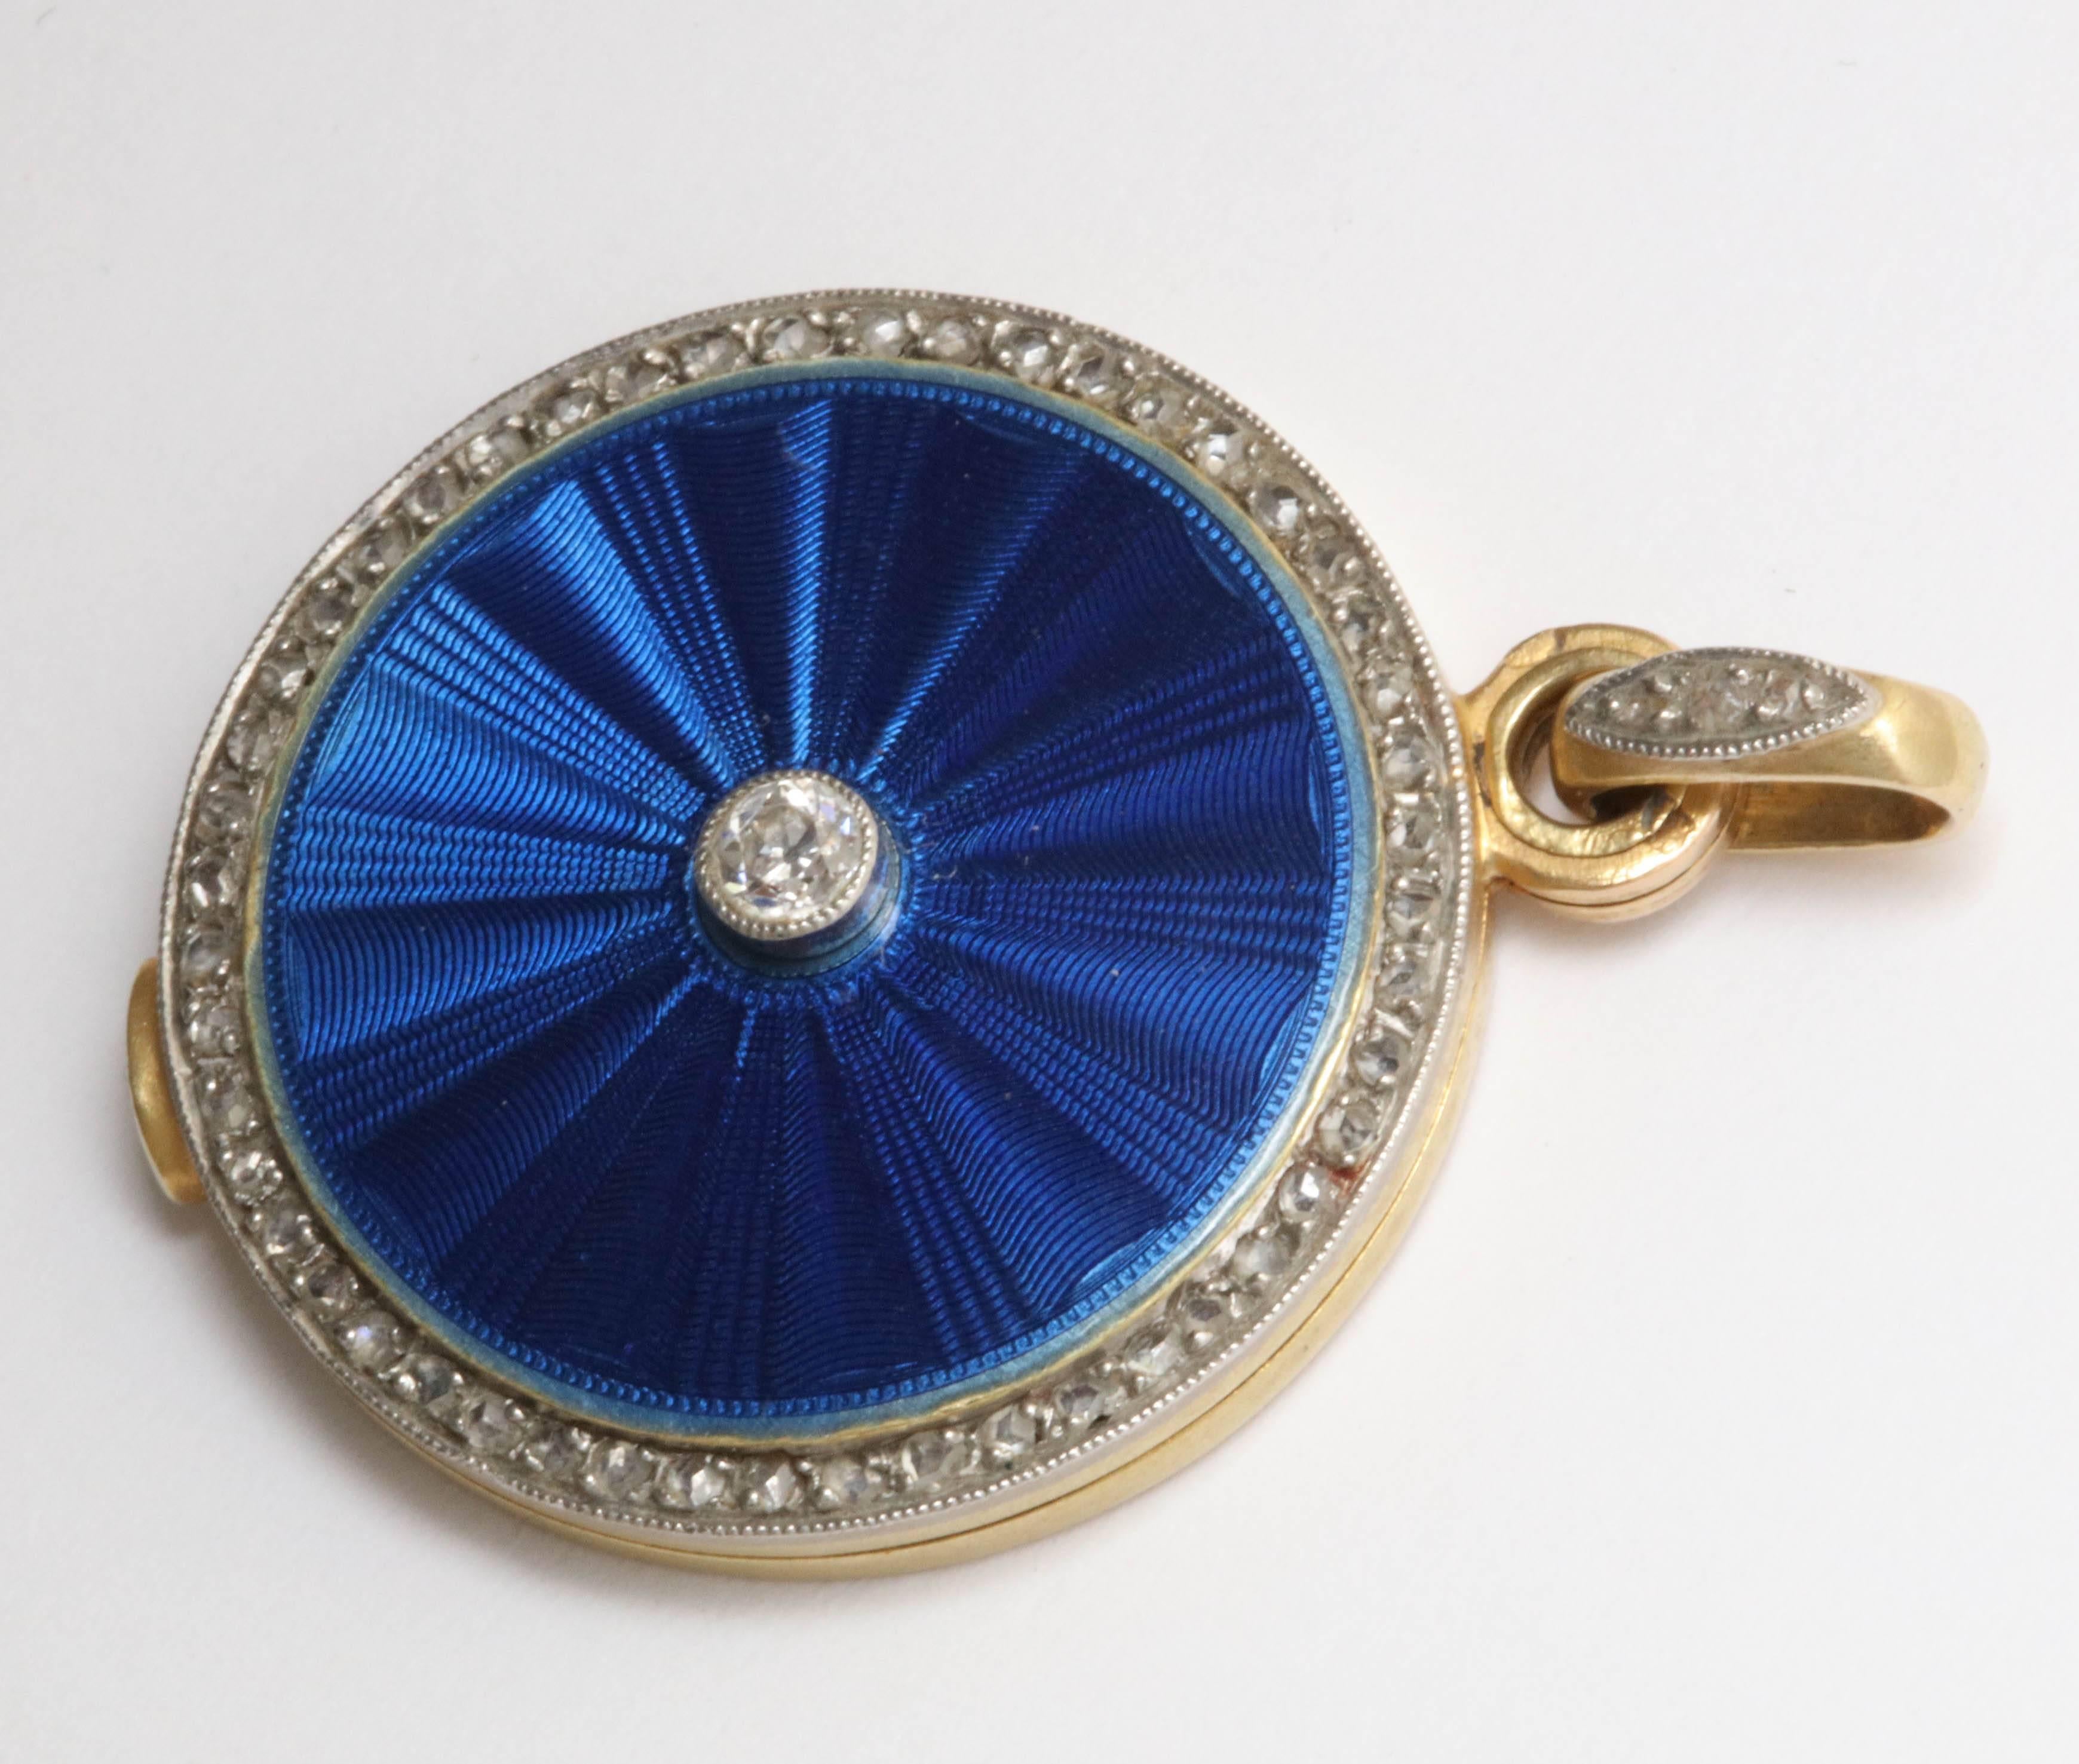 One Ladies  Flat And sleek Slide Locket Decorated With A Sunburst Design Guilloche Royal Blue Enamel In The Center Of Locket. Further Embellished With Numerous Rose Cut Diamonds Around The Border Of The Locket,. One Antique Cut Old European Cut